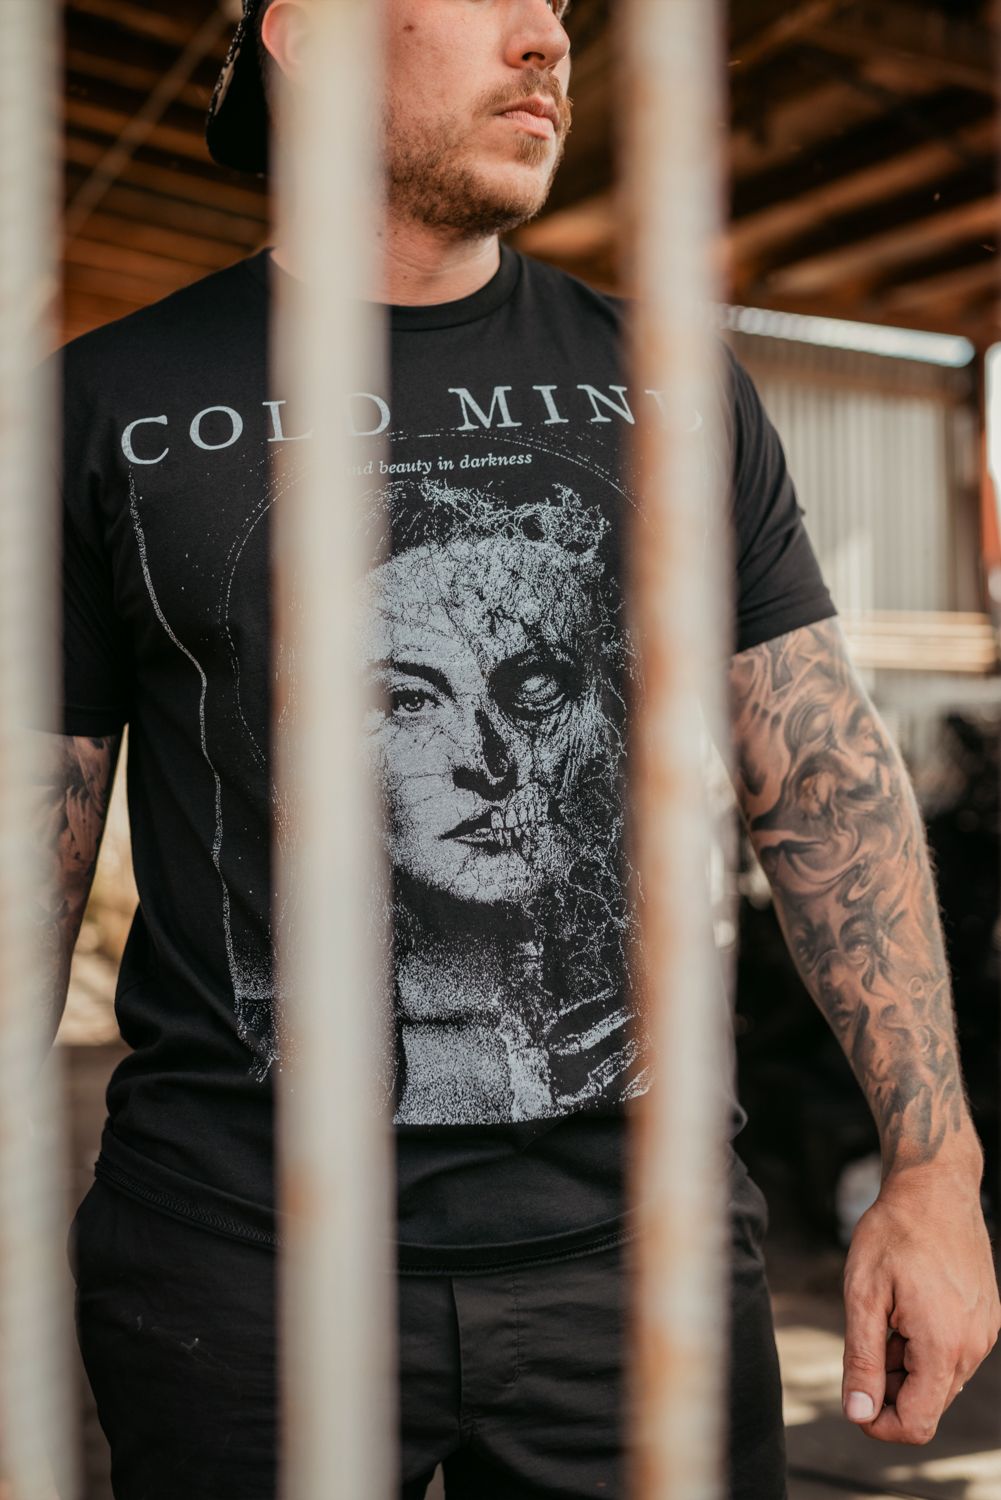 Cold Mind Beauty In Darkness T-Shirt